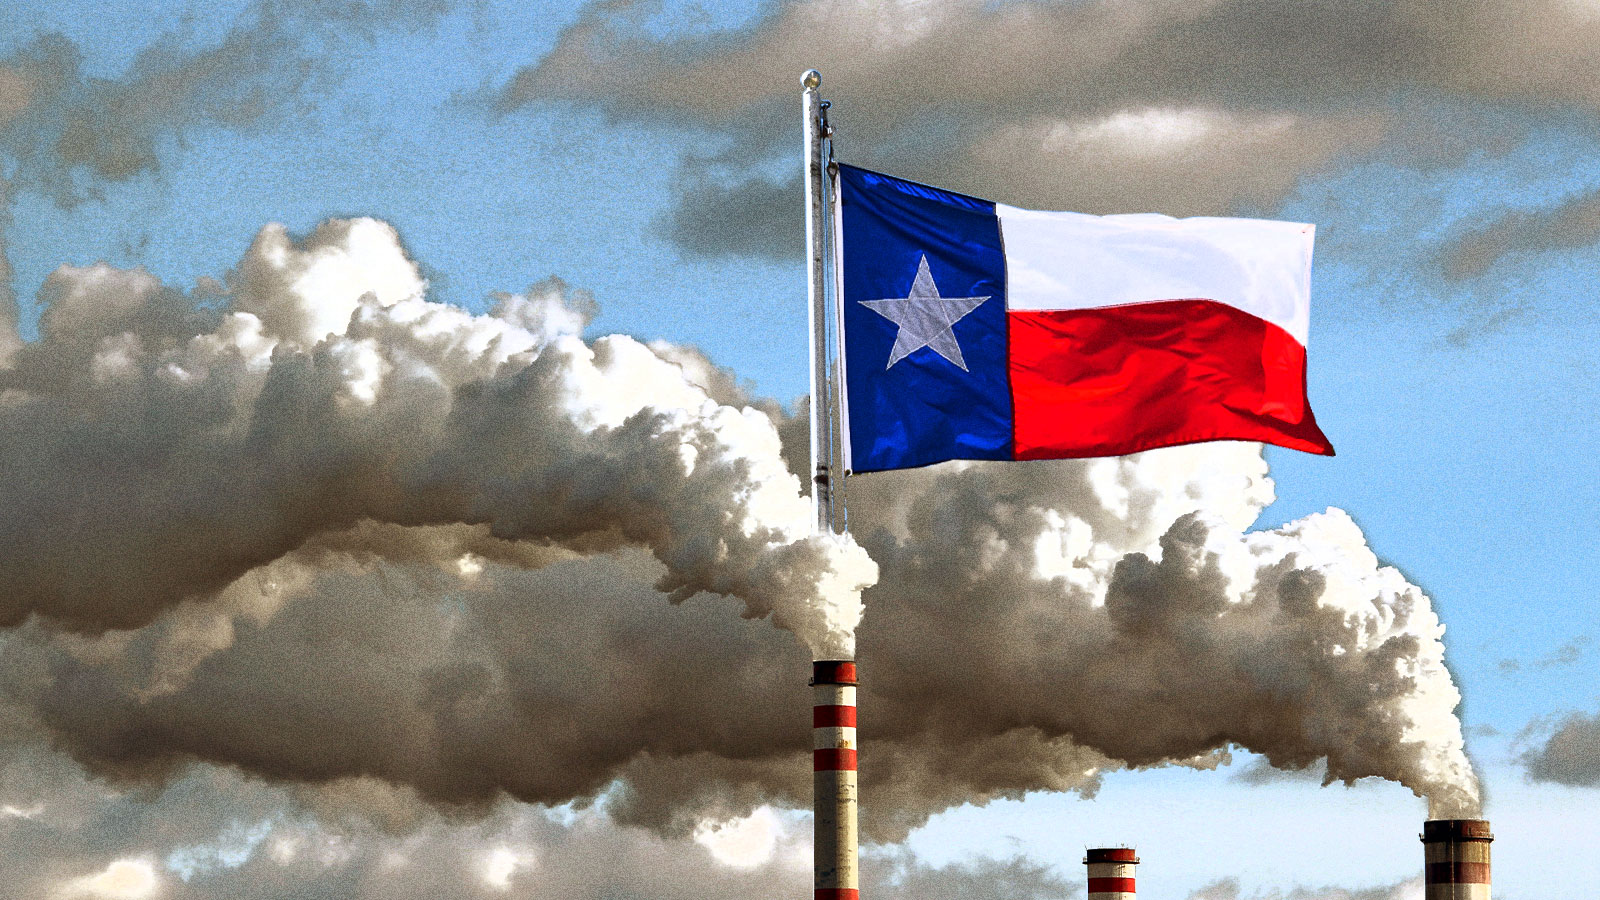 The Texas flag rising out of a smog cloud being emitted by a smokestack